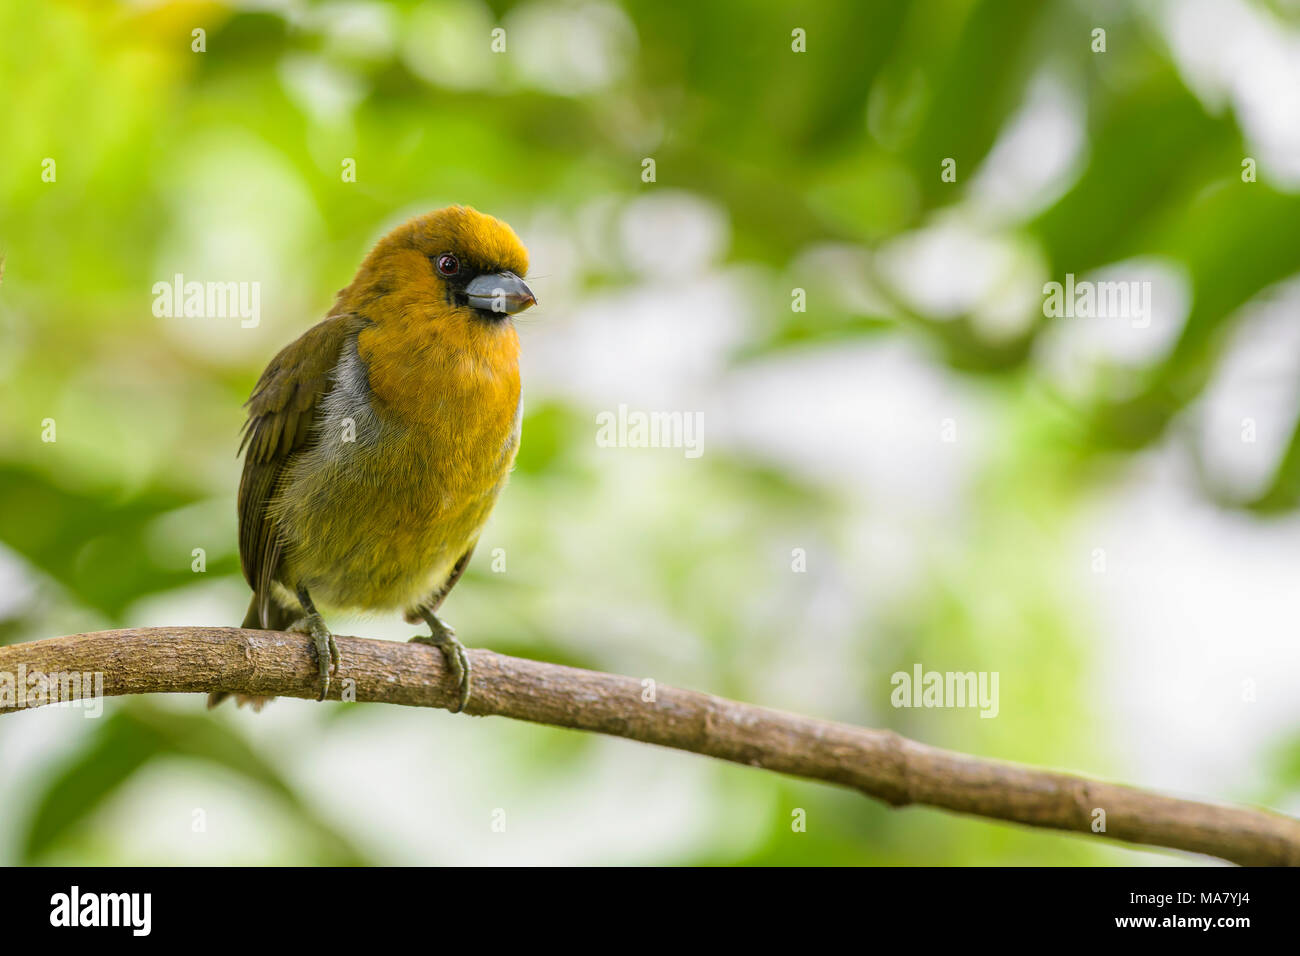 Prong-billed Barbet - Semnornis frantzii, special yellow barbet with pronged beak from Costa Rica hills. Stock Photo